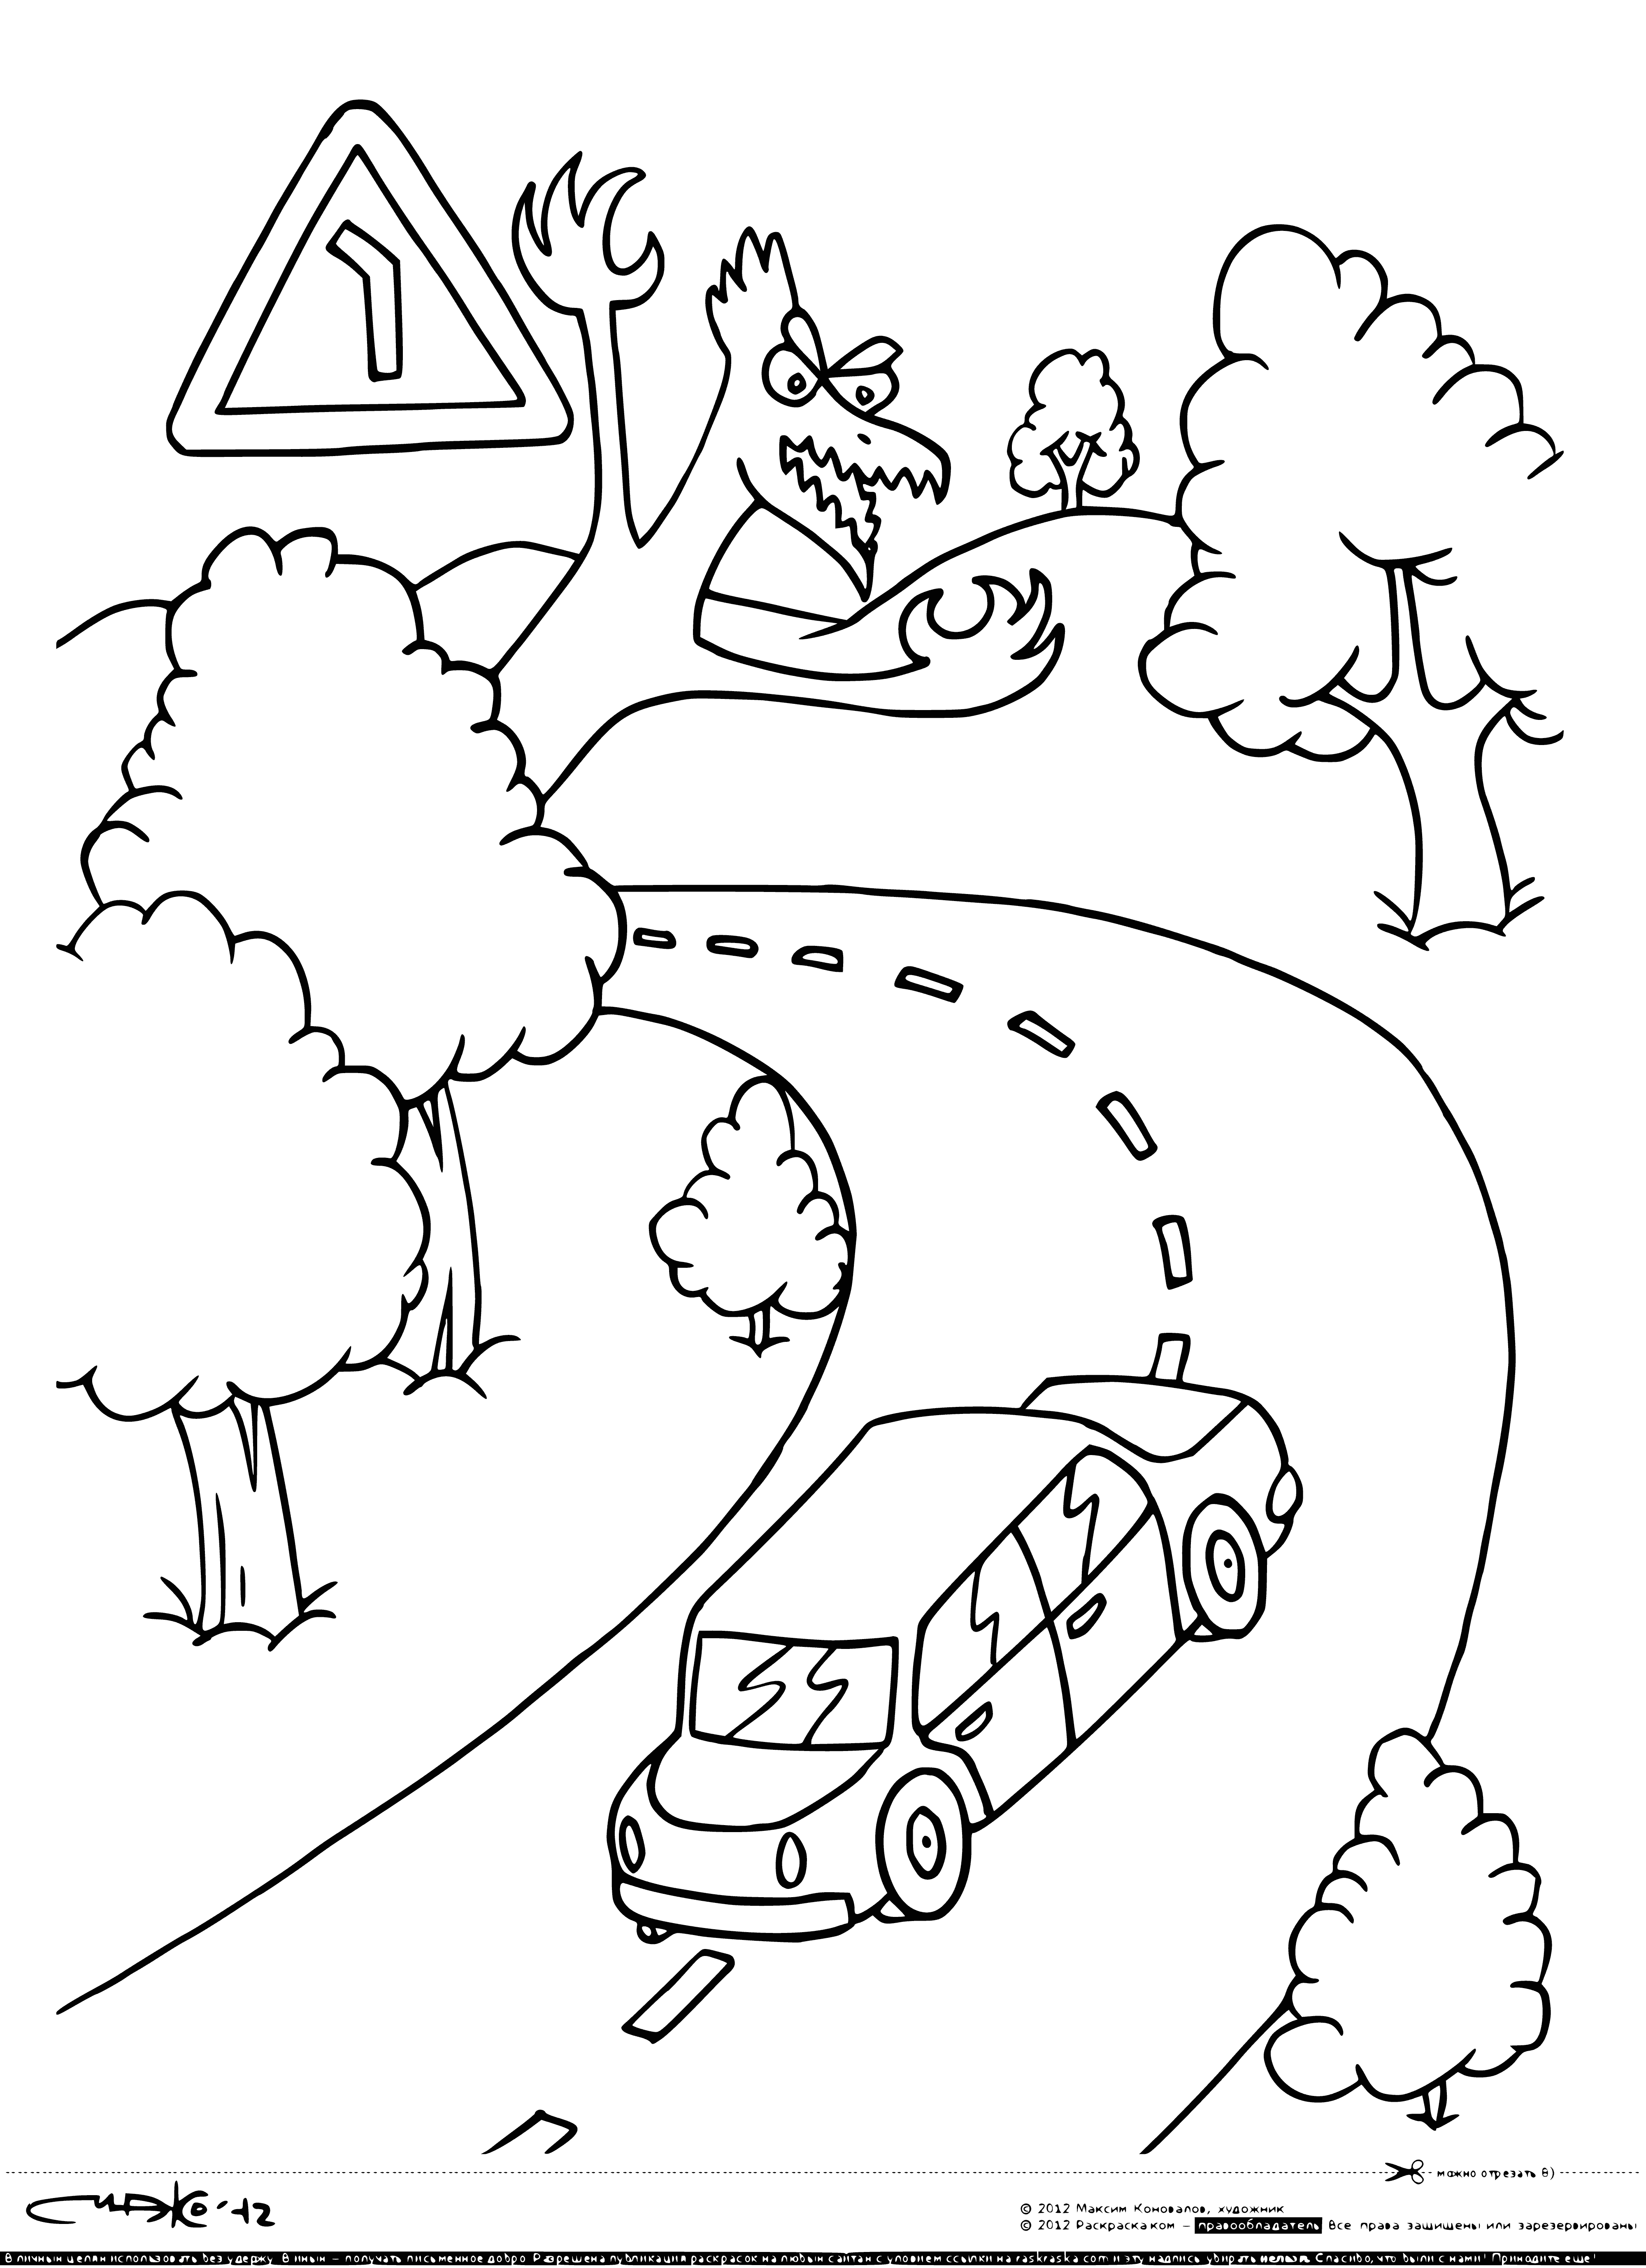 coloring page: Sign warns of a dangerous turn; coloring page shows car taking the corner.